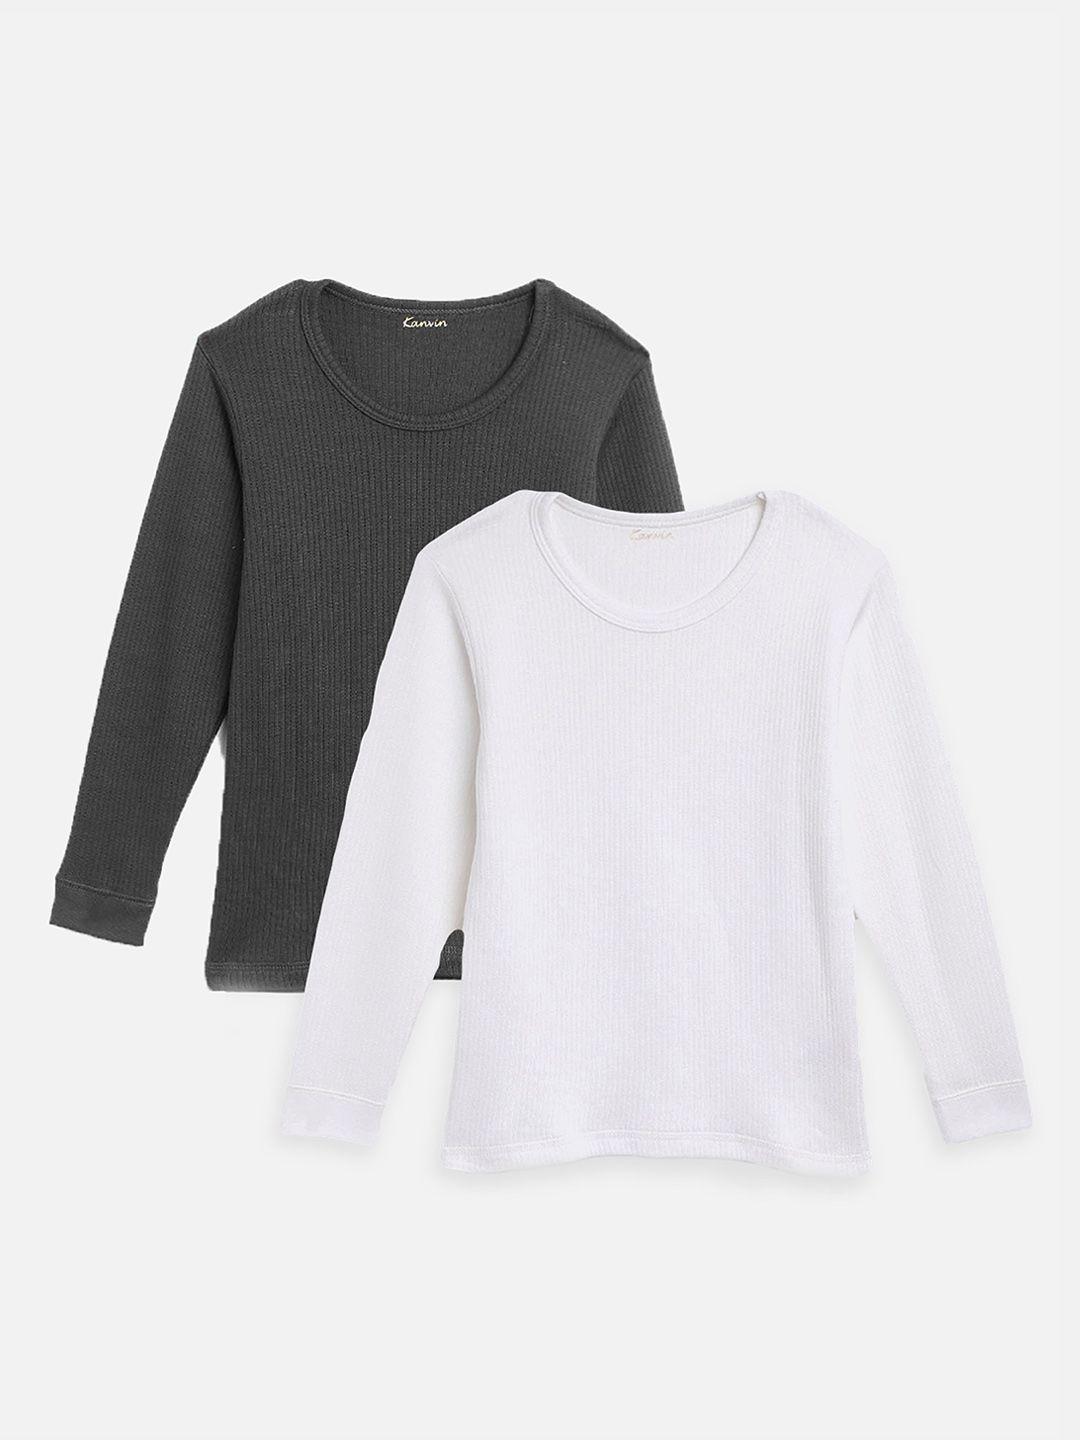 kanvin boys pack of 2  charcoal and white ribbed cotton thermal tops